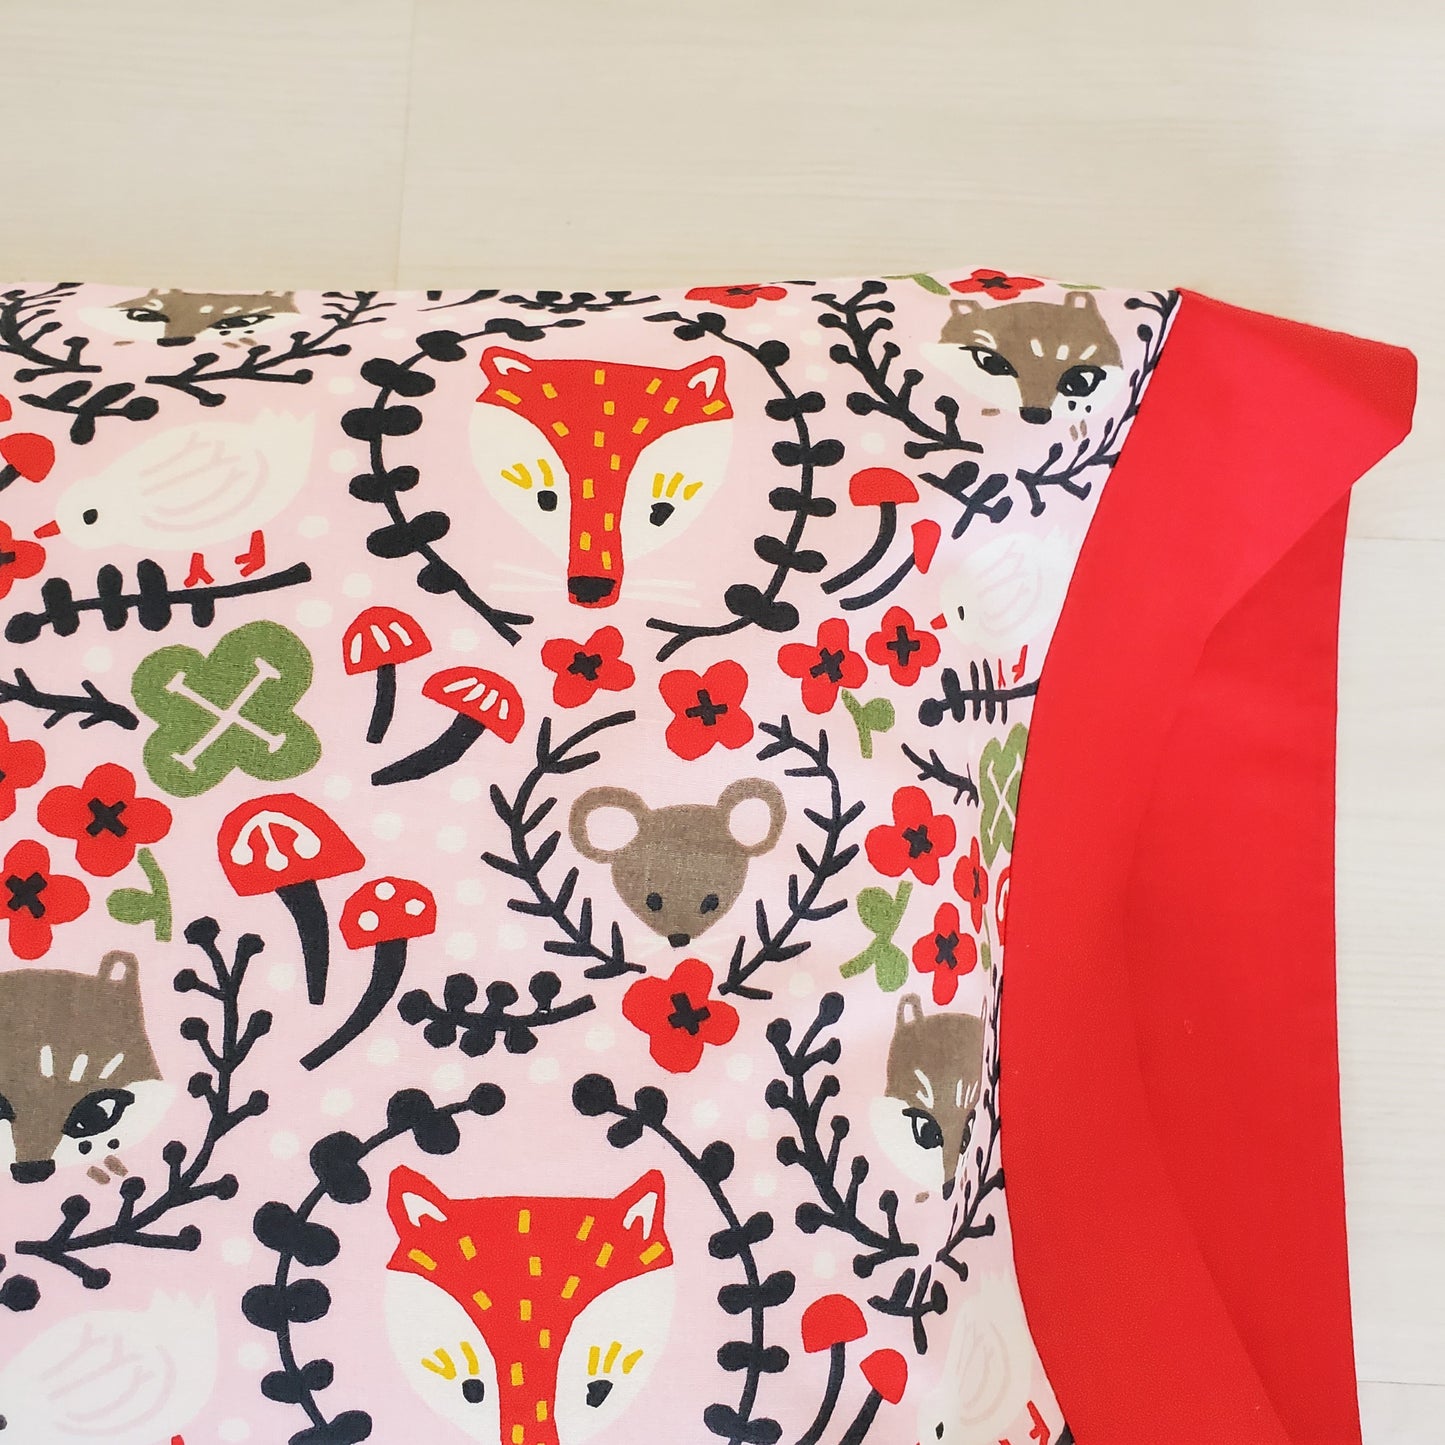 Foxes & Woodland Animal Pillowcases in Organic Cotton